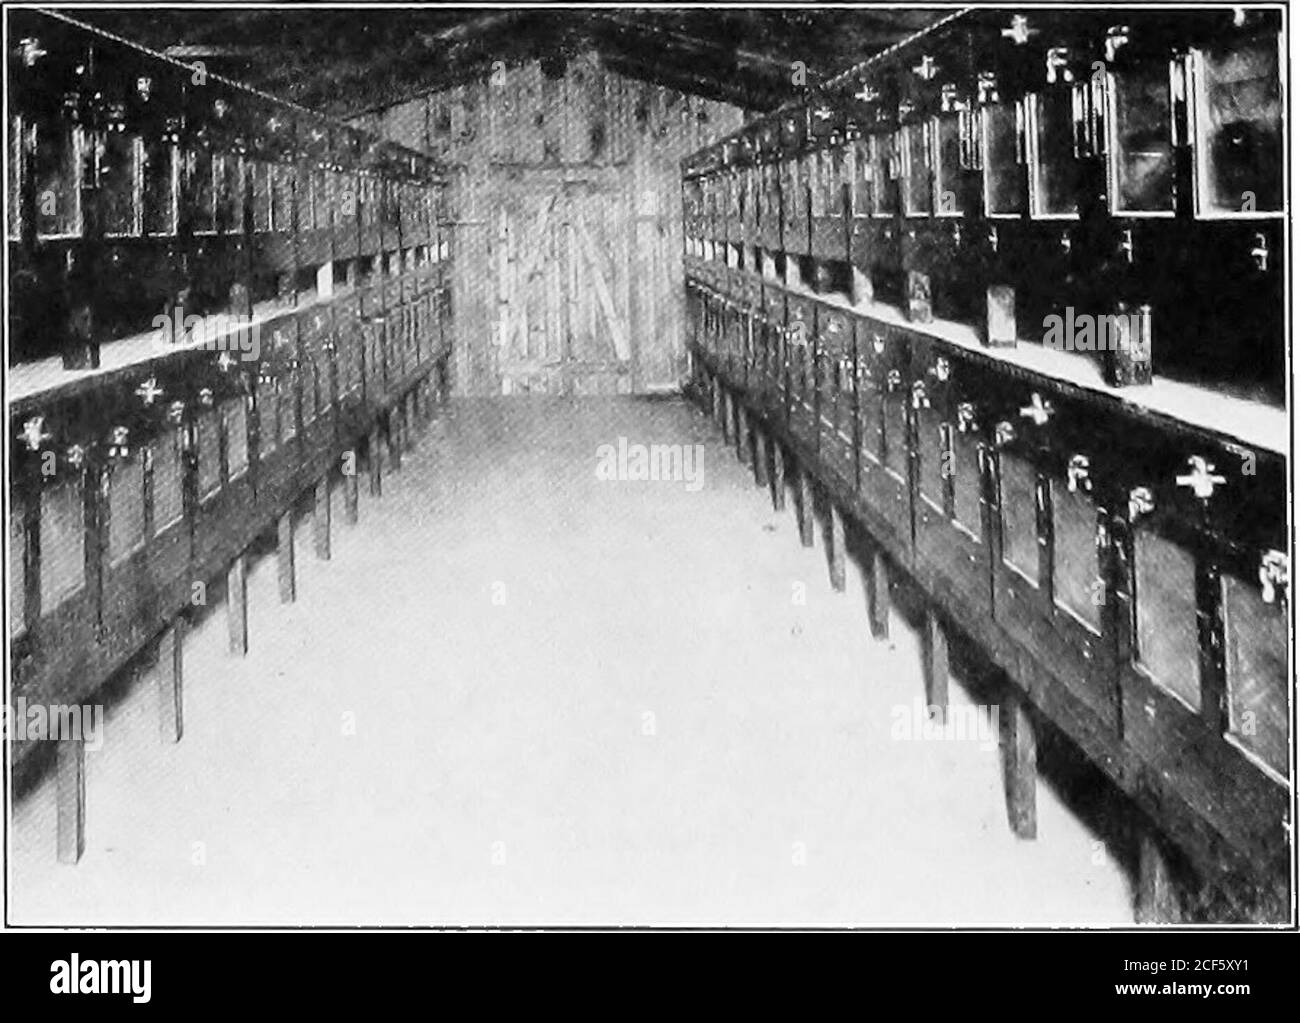 . Poultry culture. Interior of 100-hen laying house, Massachusetts AgriculturalCollege, Amherst.. Incubator cellar. 15 It is readily seen from these data that the average cost ofkeeping hens in the middle west and in Massachusetts is prac-tically the same if feed is purchased at retail prices. This,coupled with the fact that on that same date eggs were retail-ing here at from 50 to 70 cents per dozen, and at 30 cents atboth Warren and Oshkosh, gives the Massachusetts producersa great advantage. It must be kept in mind, also, that ourmilder climate means a much higher egg production at thattime Stock Photo